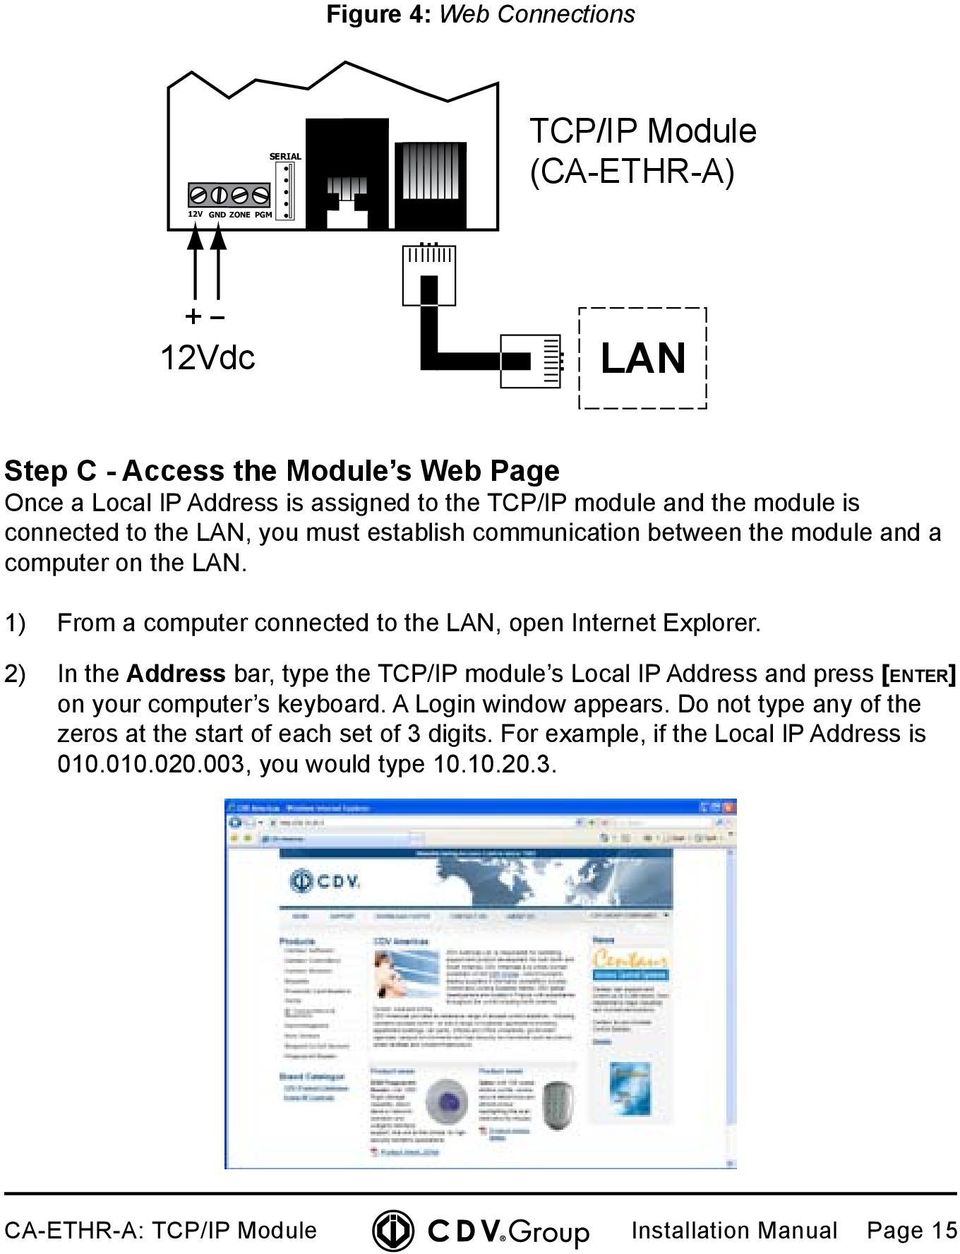 1) From a computer connected to the LAN, open Internet Explorer. 2) In the Address bar, type the TCP/IP module s Local IP Address and press [enter] on your computer s keyboard.